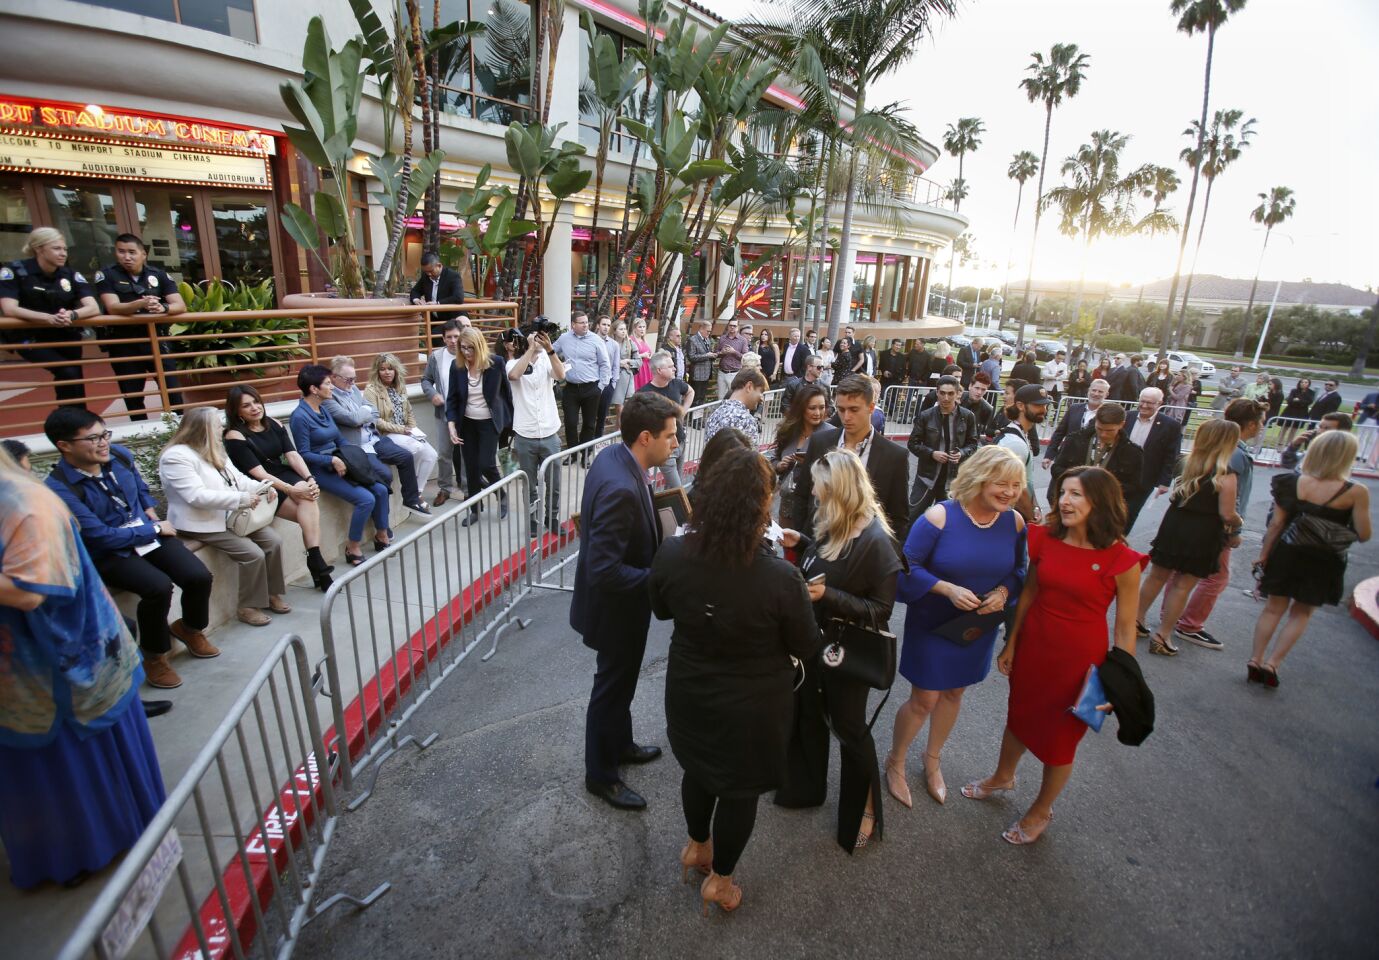 Patrons wait in line for the Newport Beach Film Festival's West Coast premiere of “Luce” at the Edwards Big Newport 1 during the opening night of the 2019 Newport Beach Film Festival on Thursday.